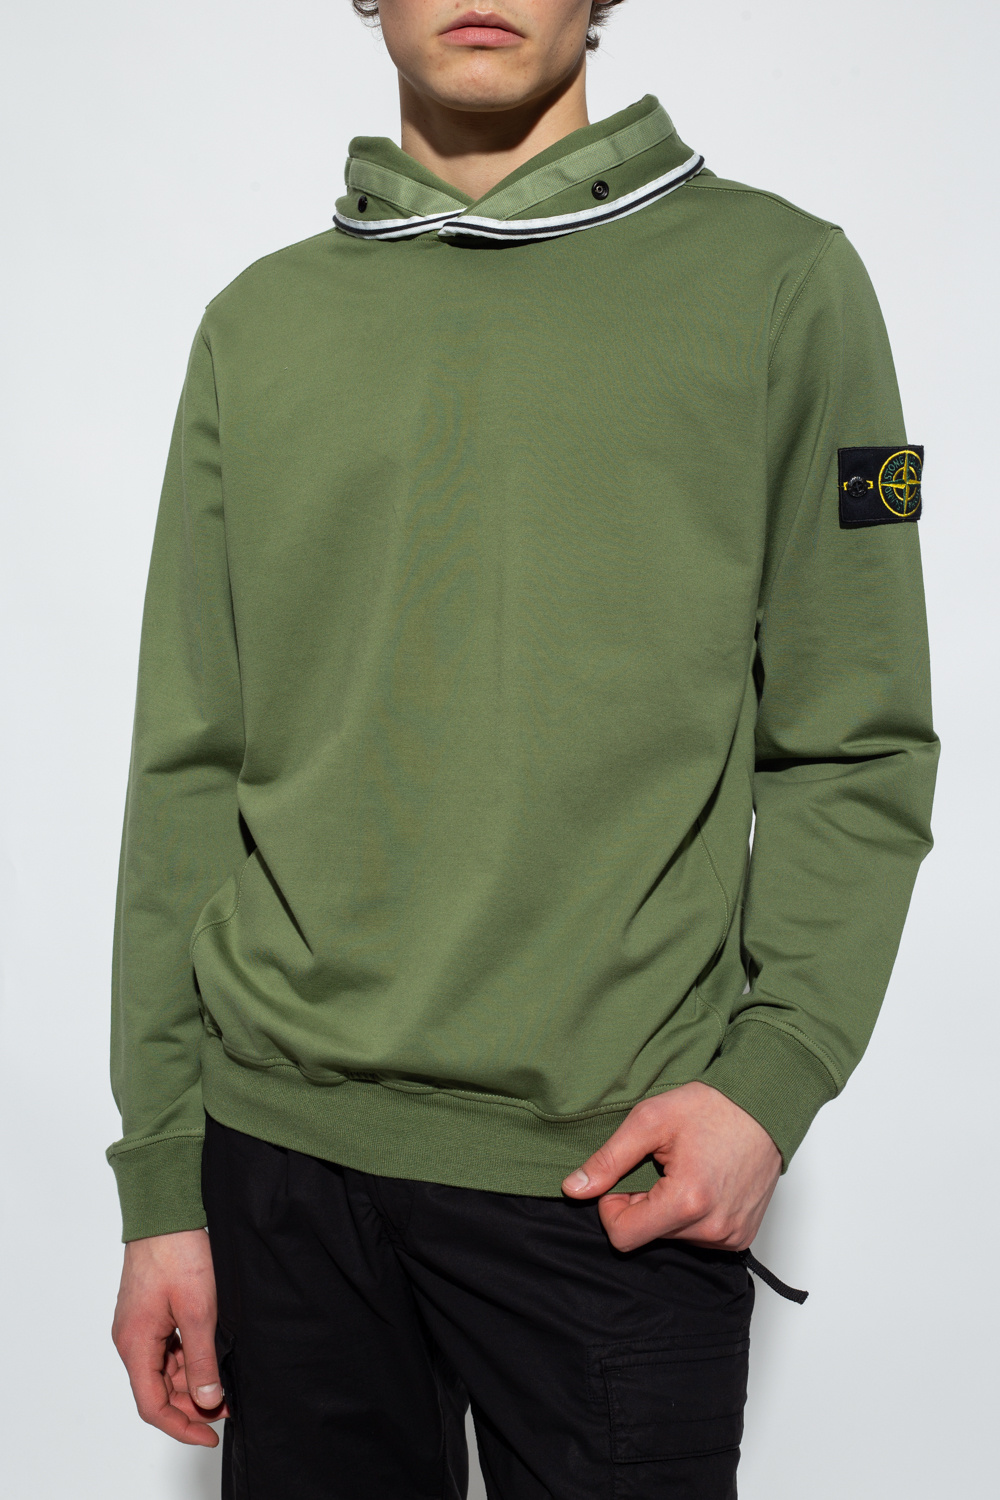 Stone Island SELECTED HOMME Pullover 'Berg' cognac